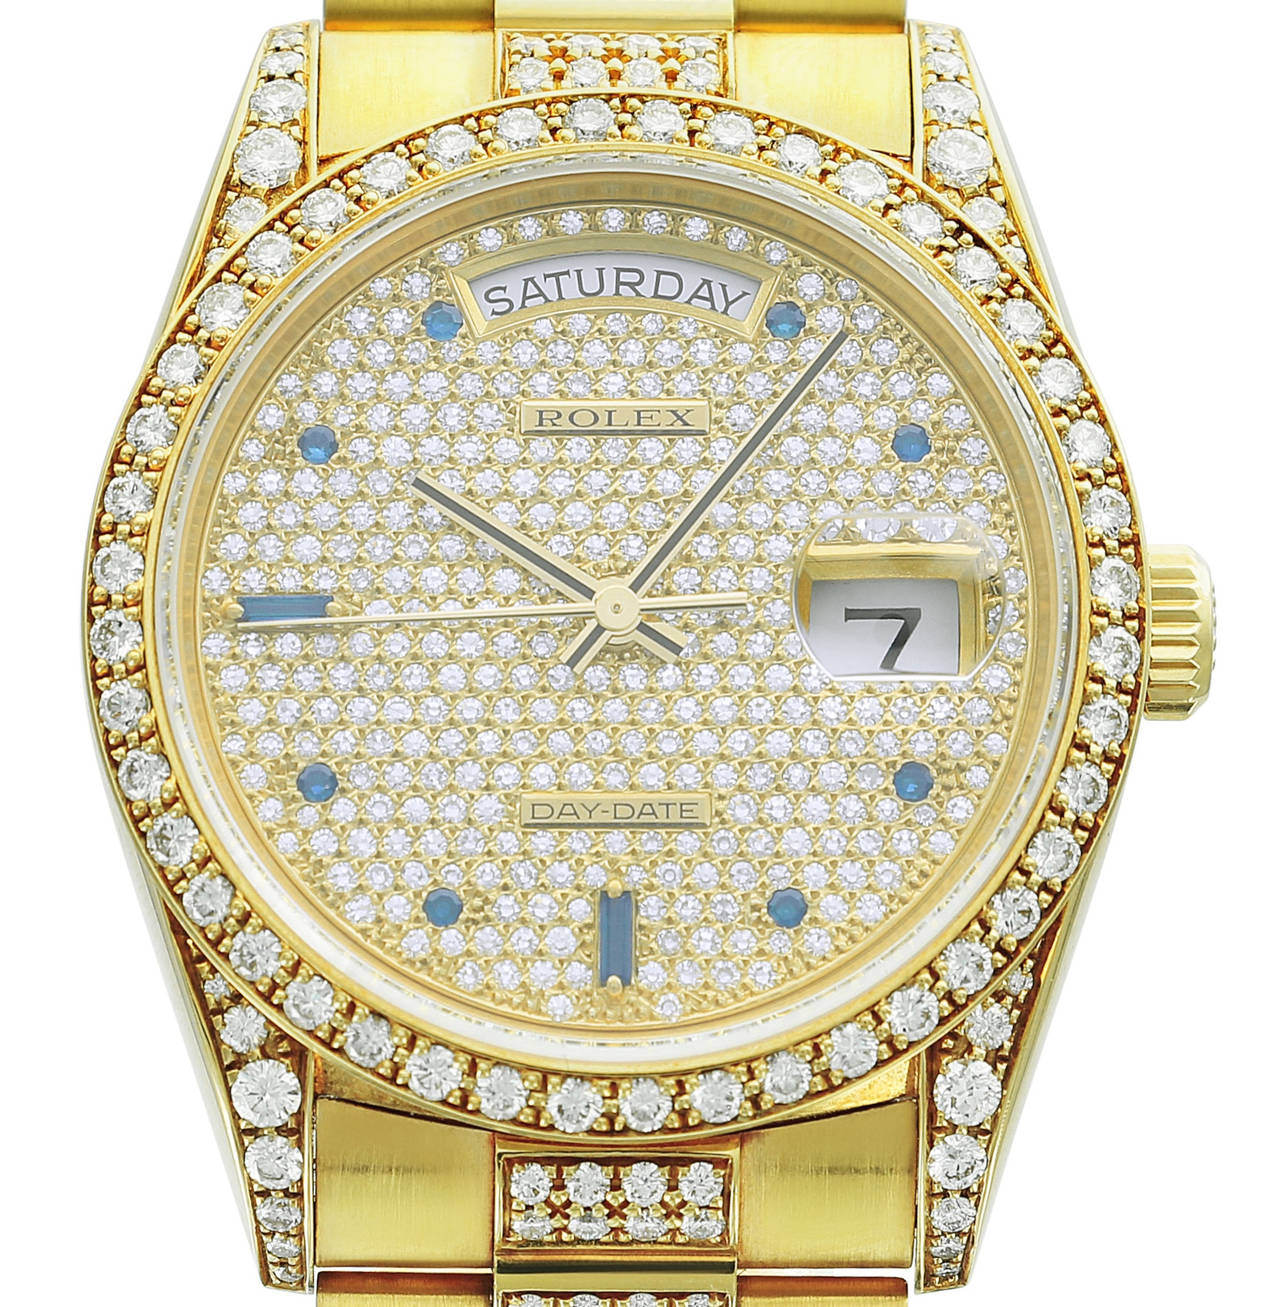 This rare Rolex Day-Date features an original pavé diamond and sapphire dial, diamond bezel and diamond and yellow gold bracelet. Every piece of this beautiful Day-Date is an original, 